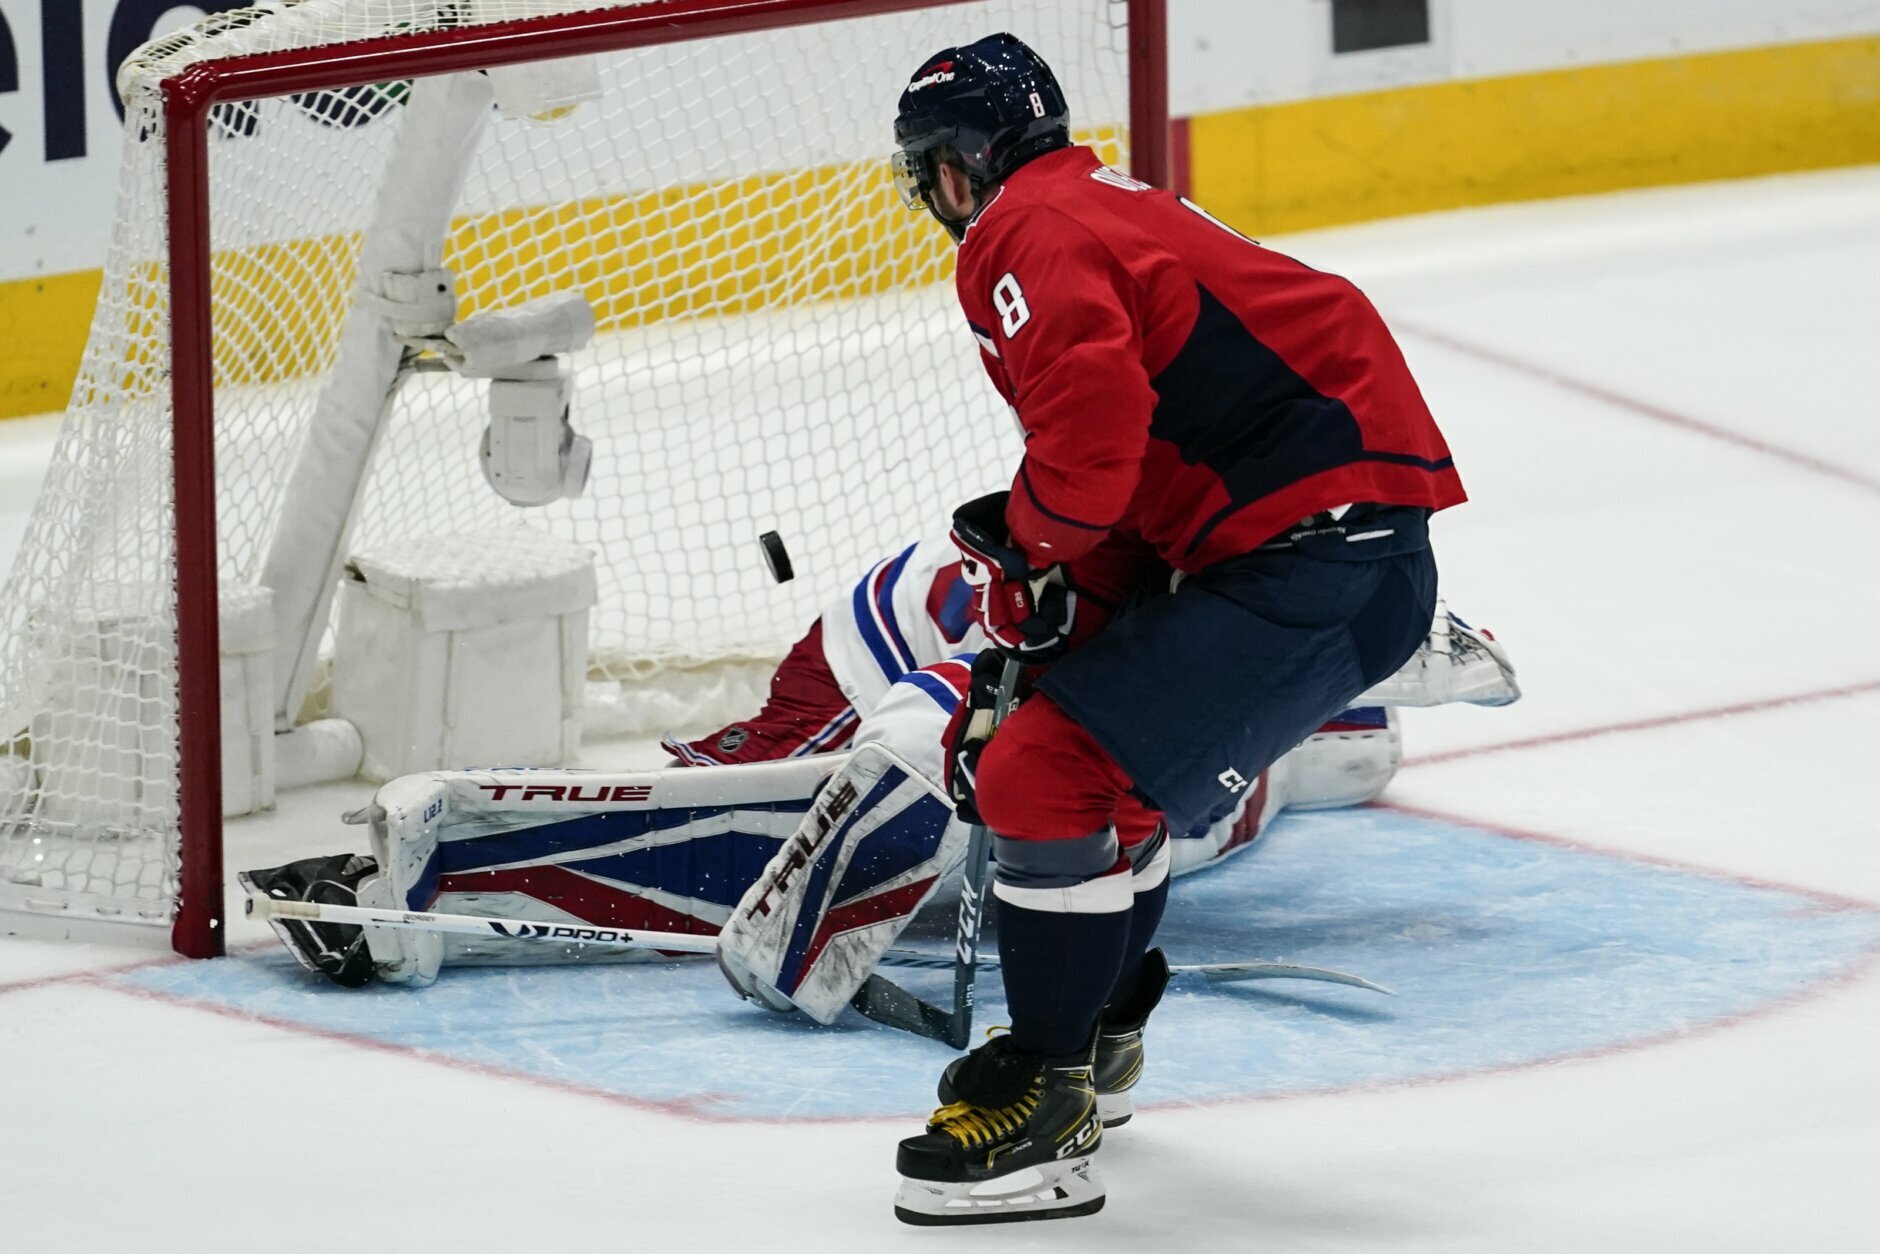 Rangers advance in OT on Stepan's goal, beat Capitals 2-1 – Daily News